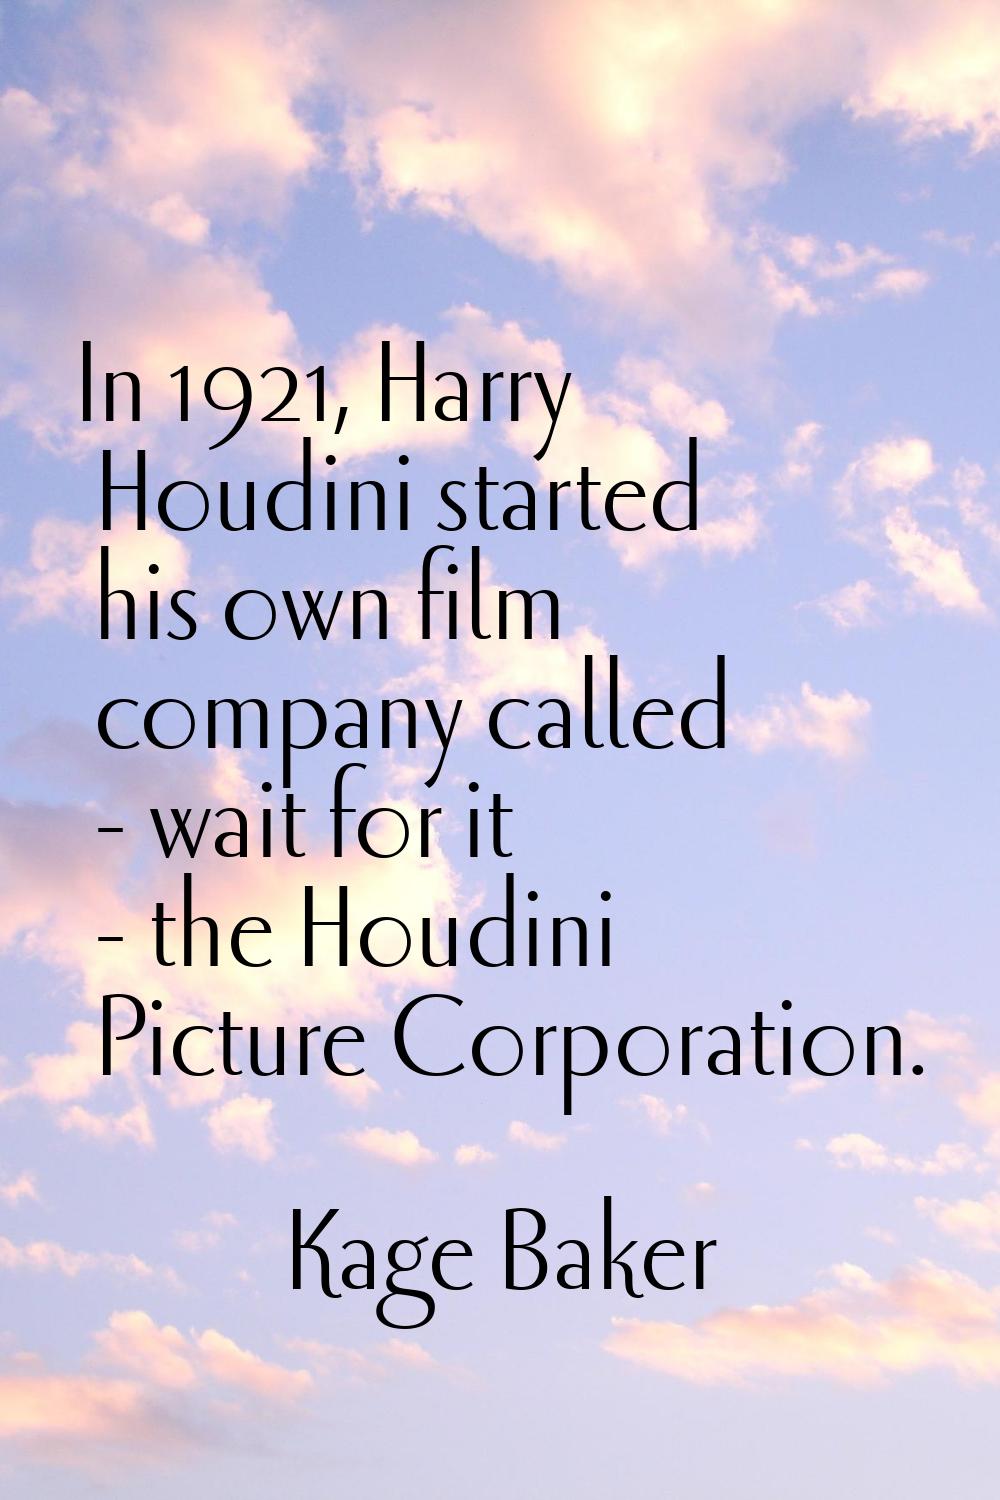 In 1921, Harry Houdini started his own film company called - wait for it - the Houdini Picture Corp